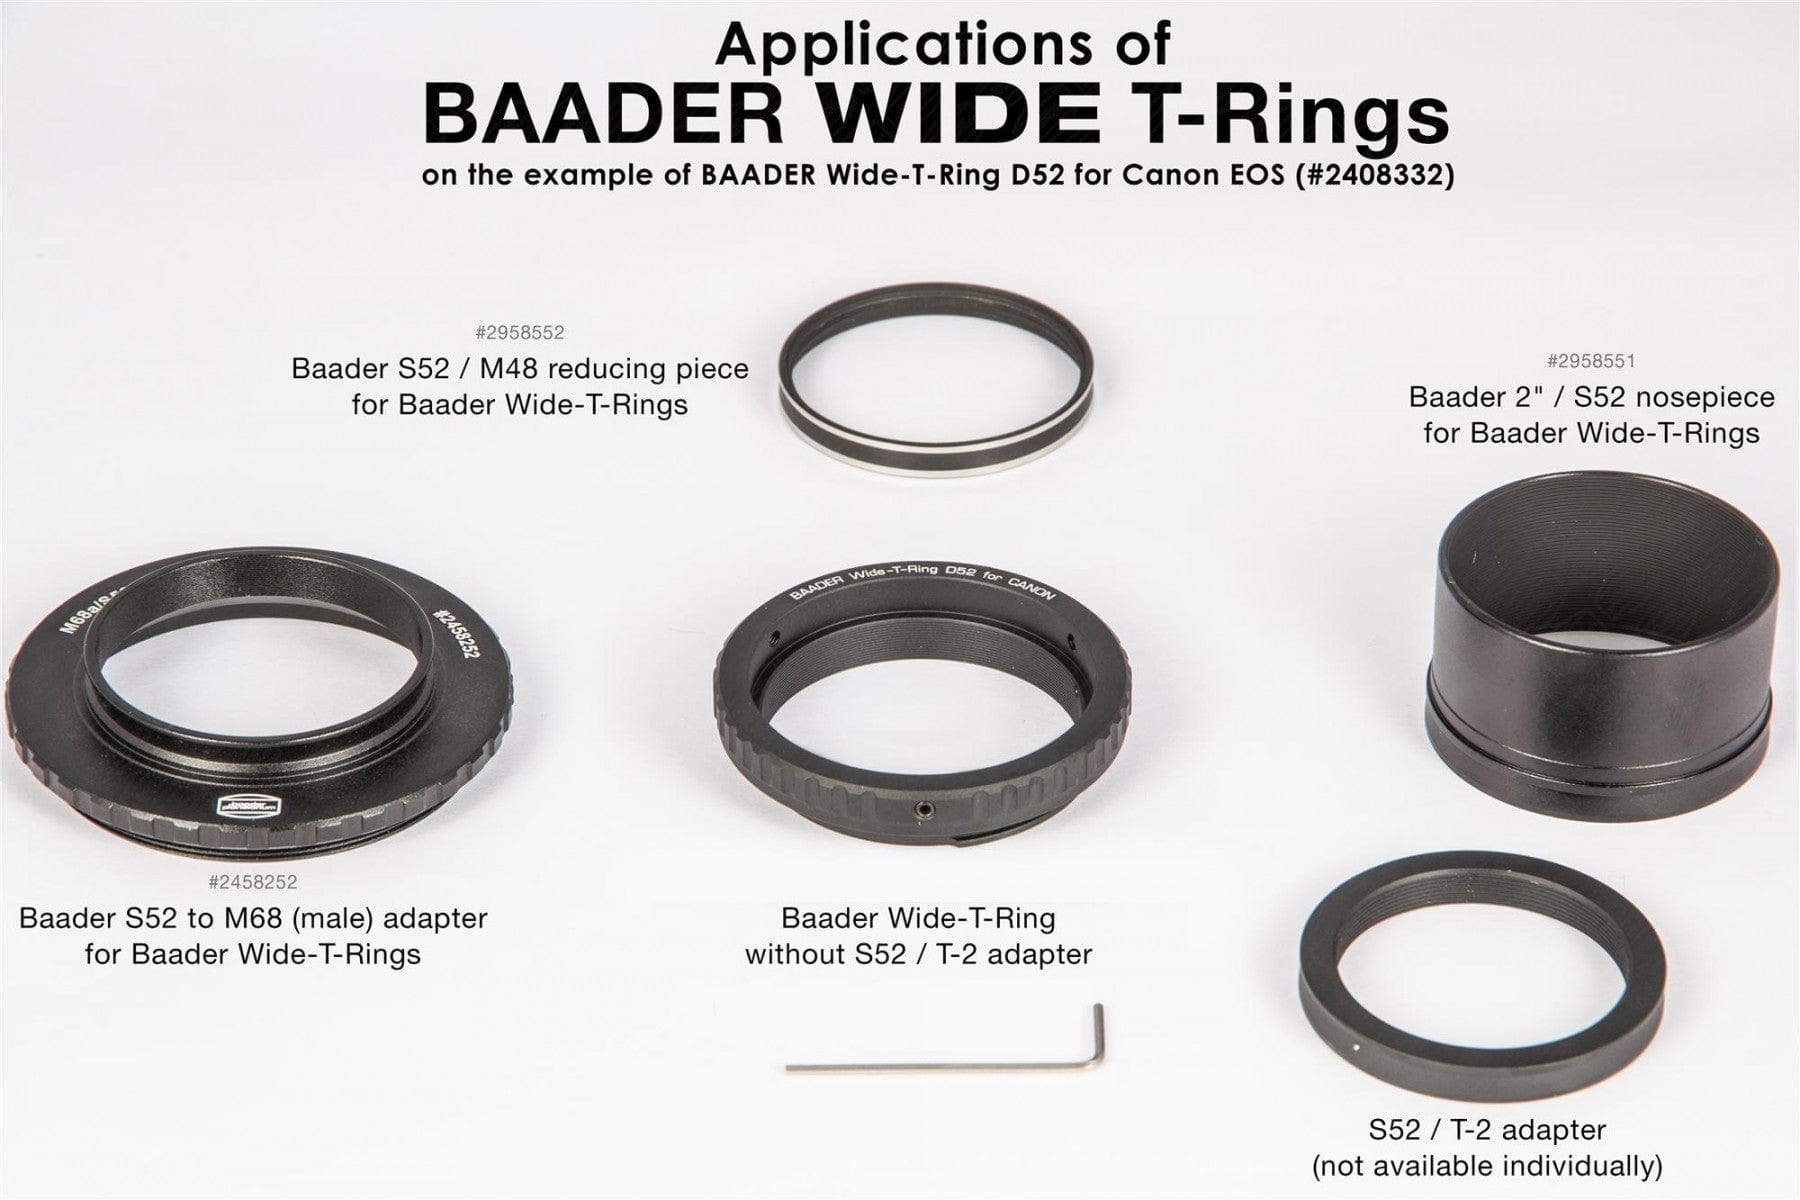 Baader Planetarium Accessory Baader Wide T-Ring Canon EOS with D52i to T-2 and S52 - 2408332